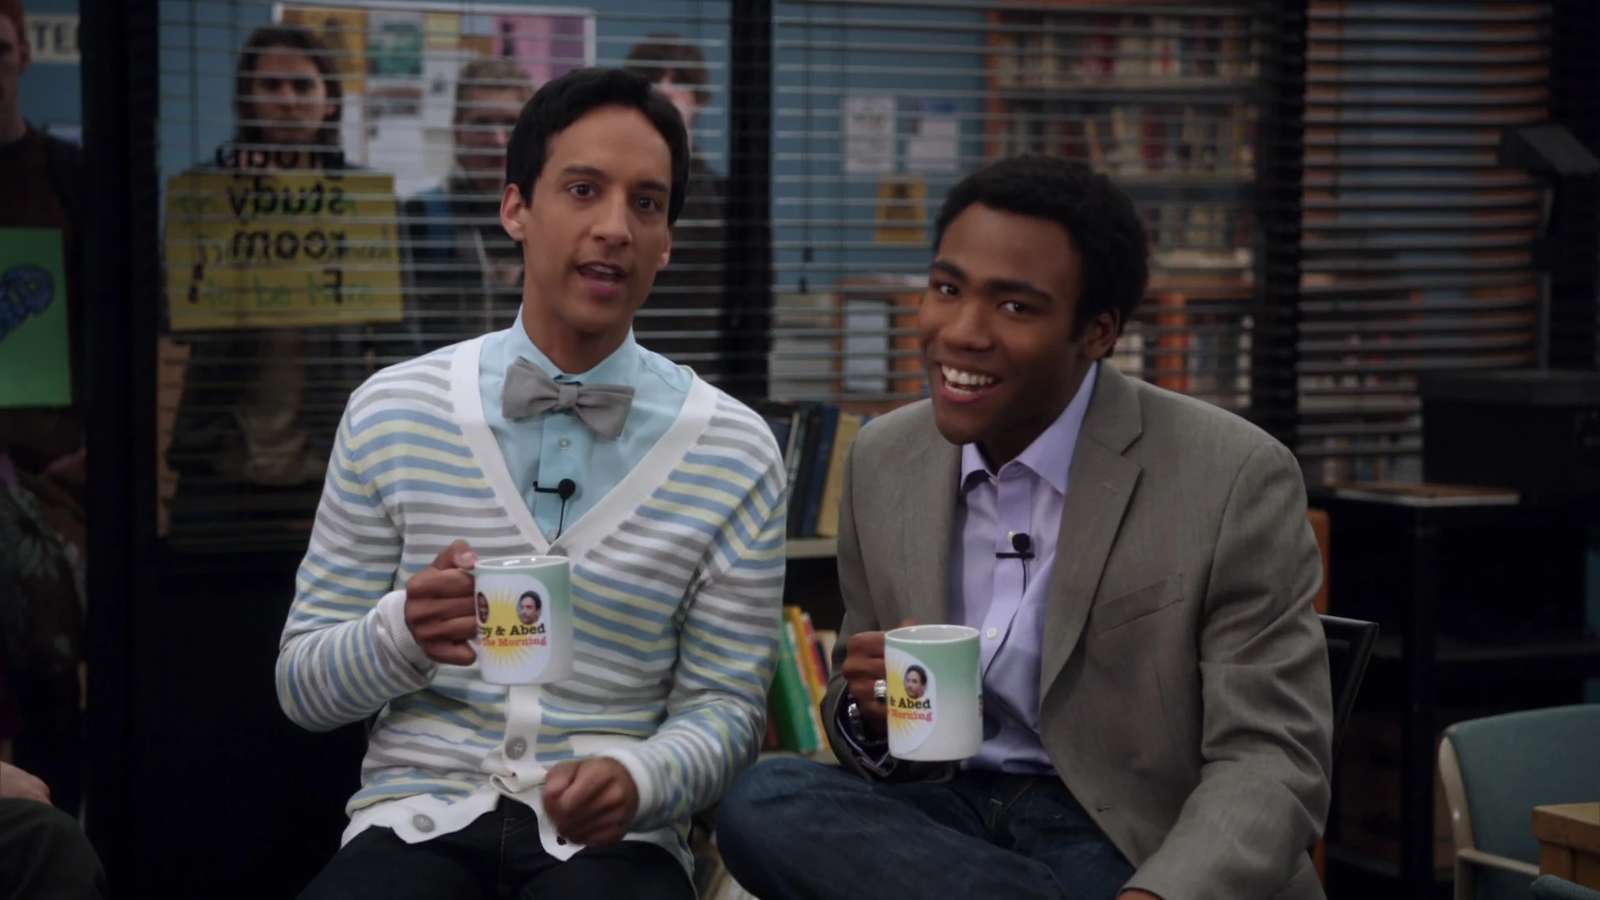 Troy and Abed in the morning online puzzle